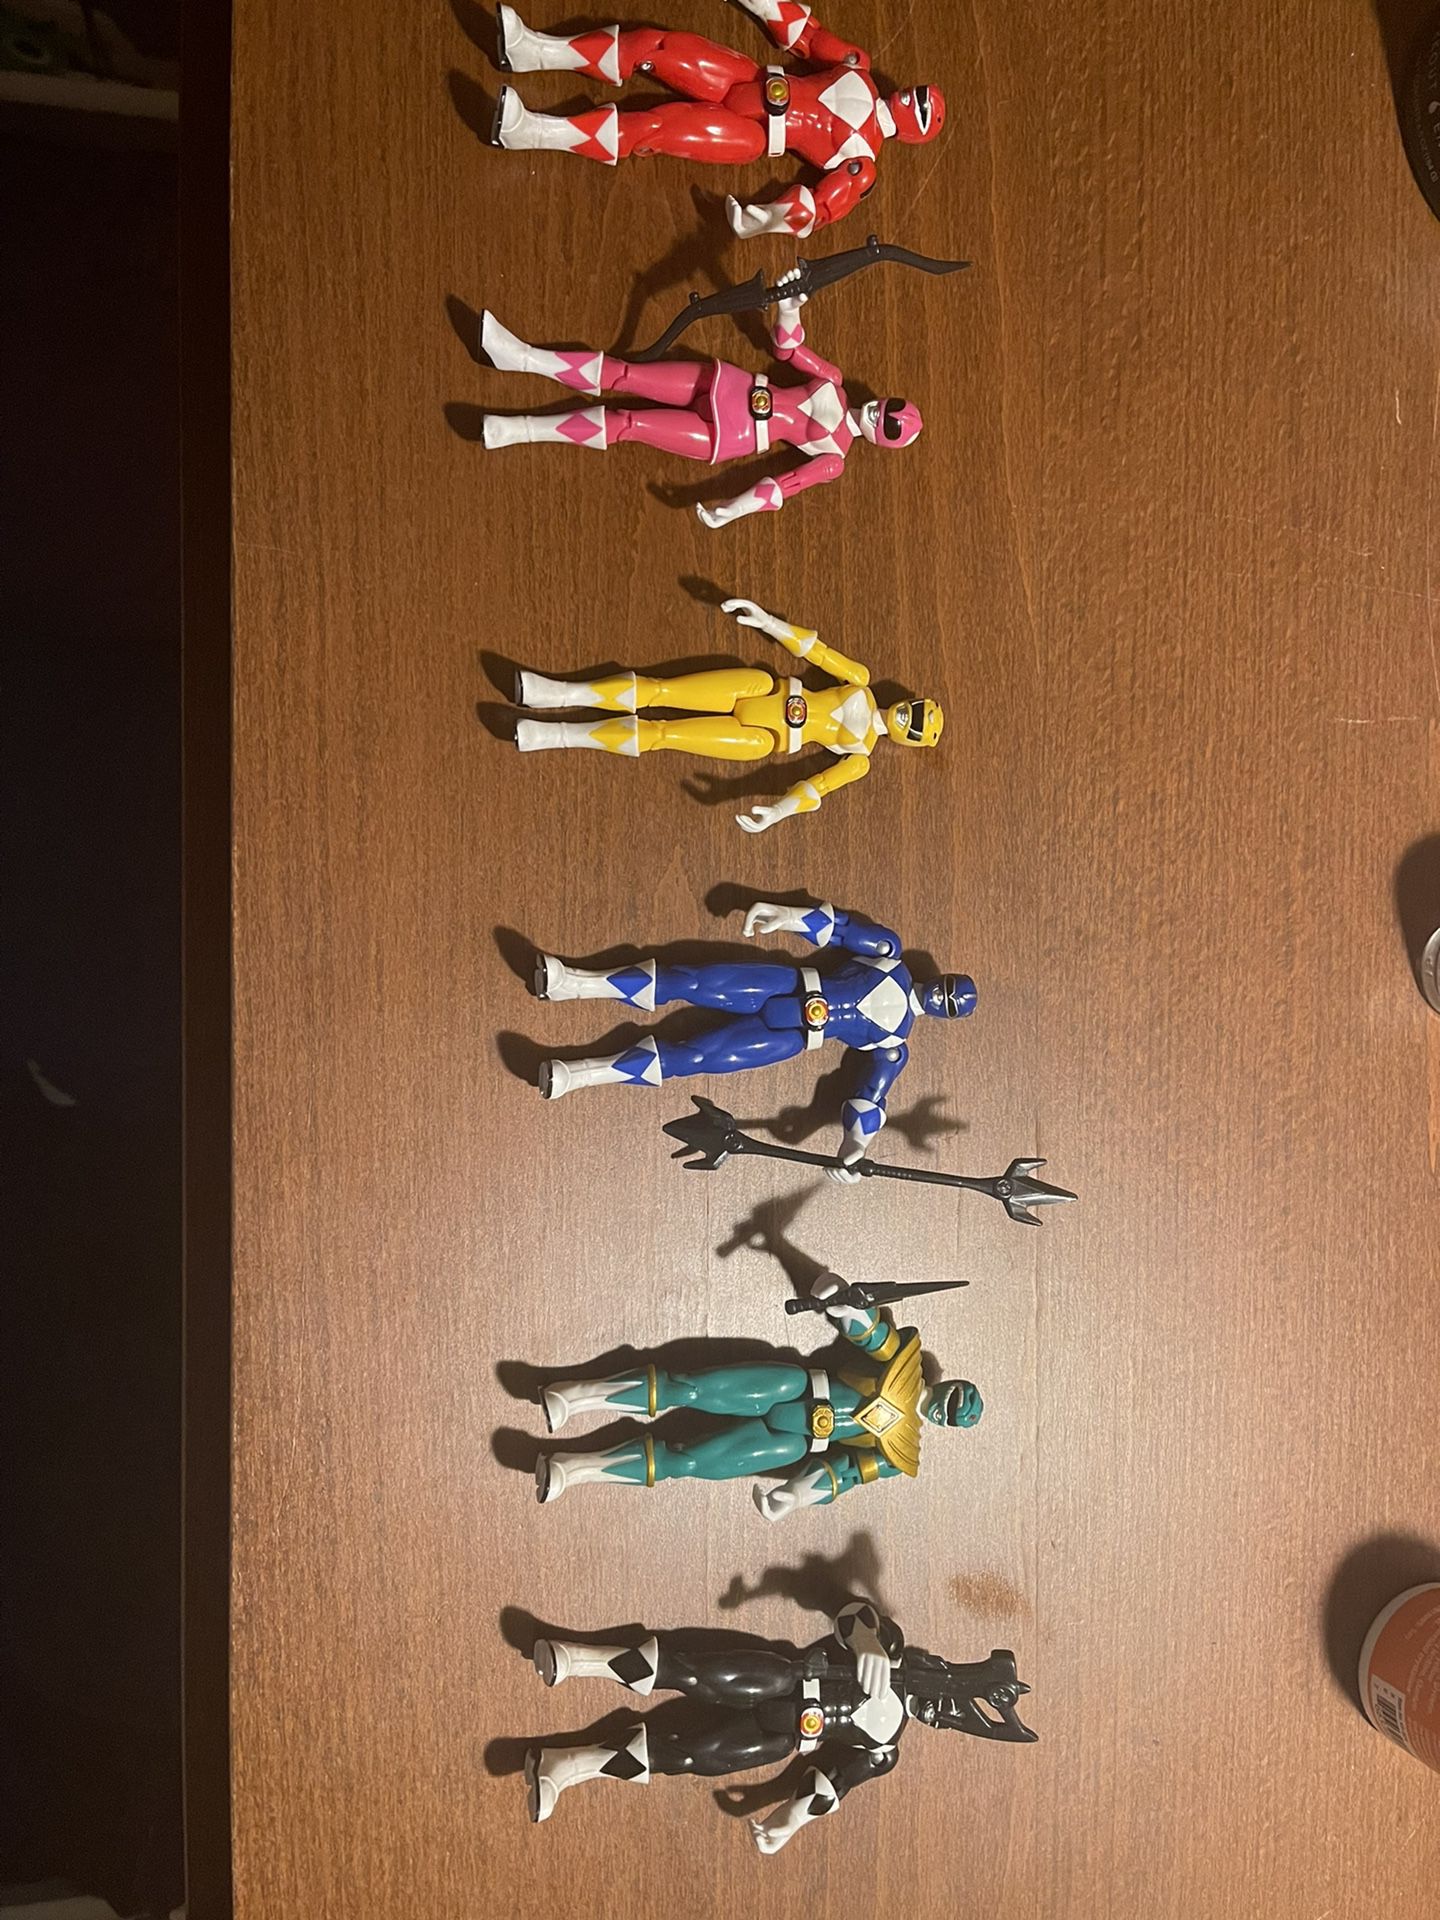 2009 MIGHTY MORPHIN POWER RANGERS COMPLETE SET RARE COLLECTOR'S ITEM